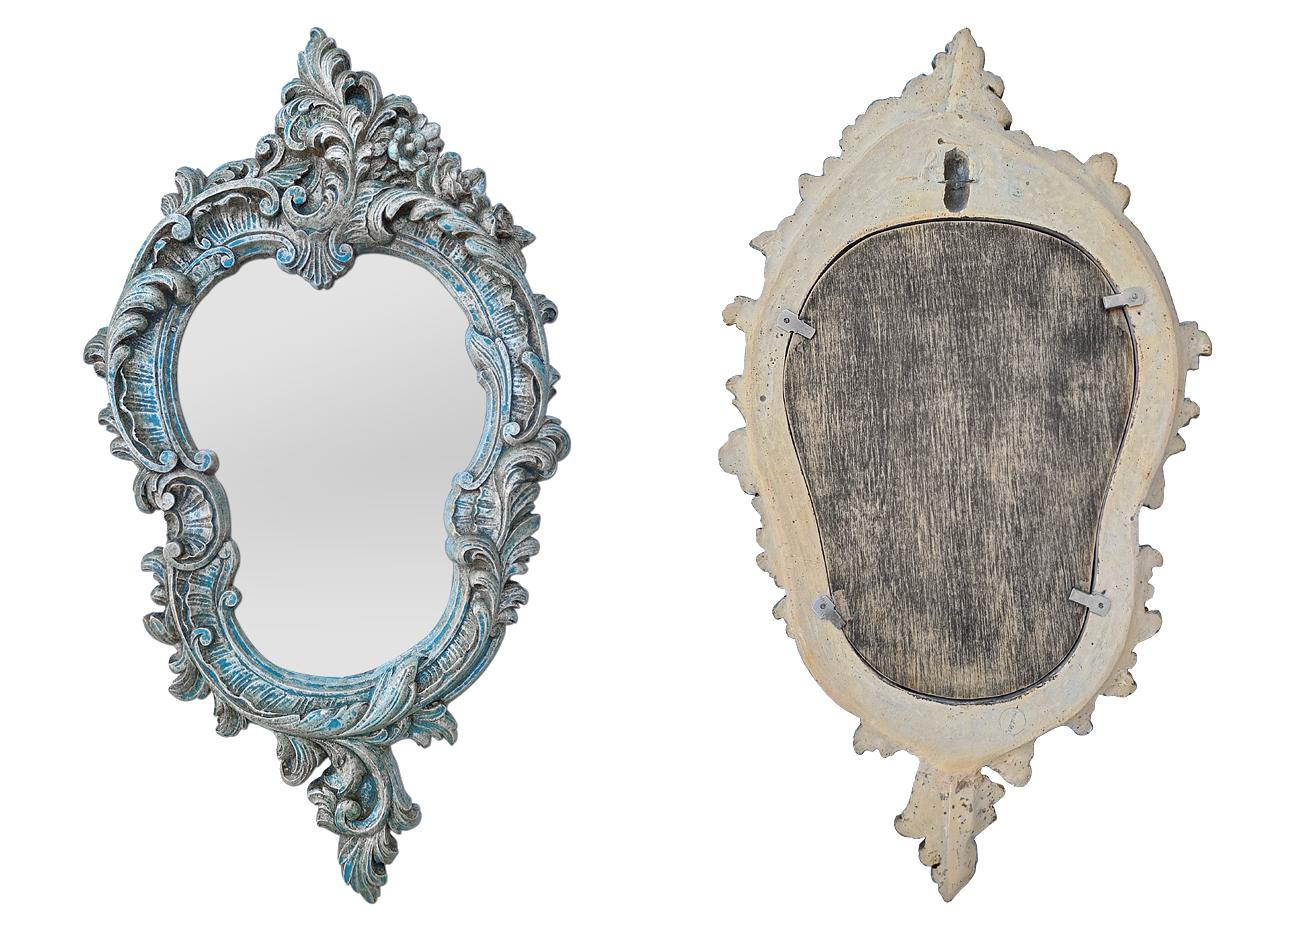 Mid-20th Century Antique Venetian Style In Terracotta Mirror Silvered and Blue, circa 1950 For Sale